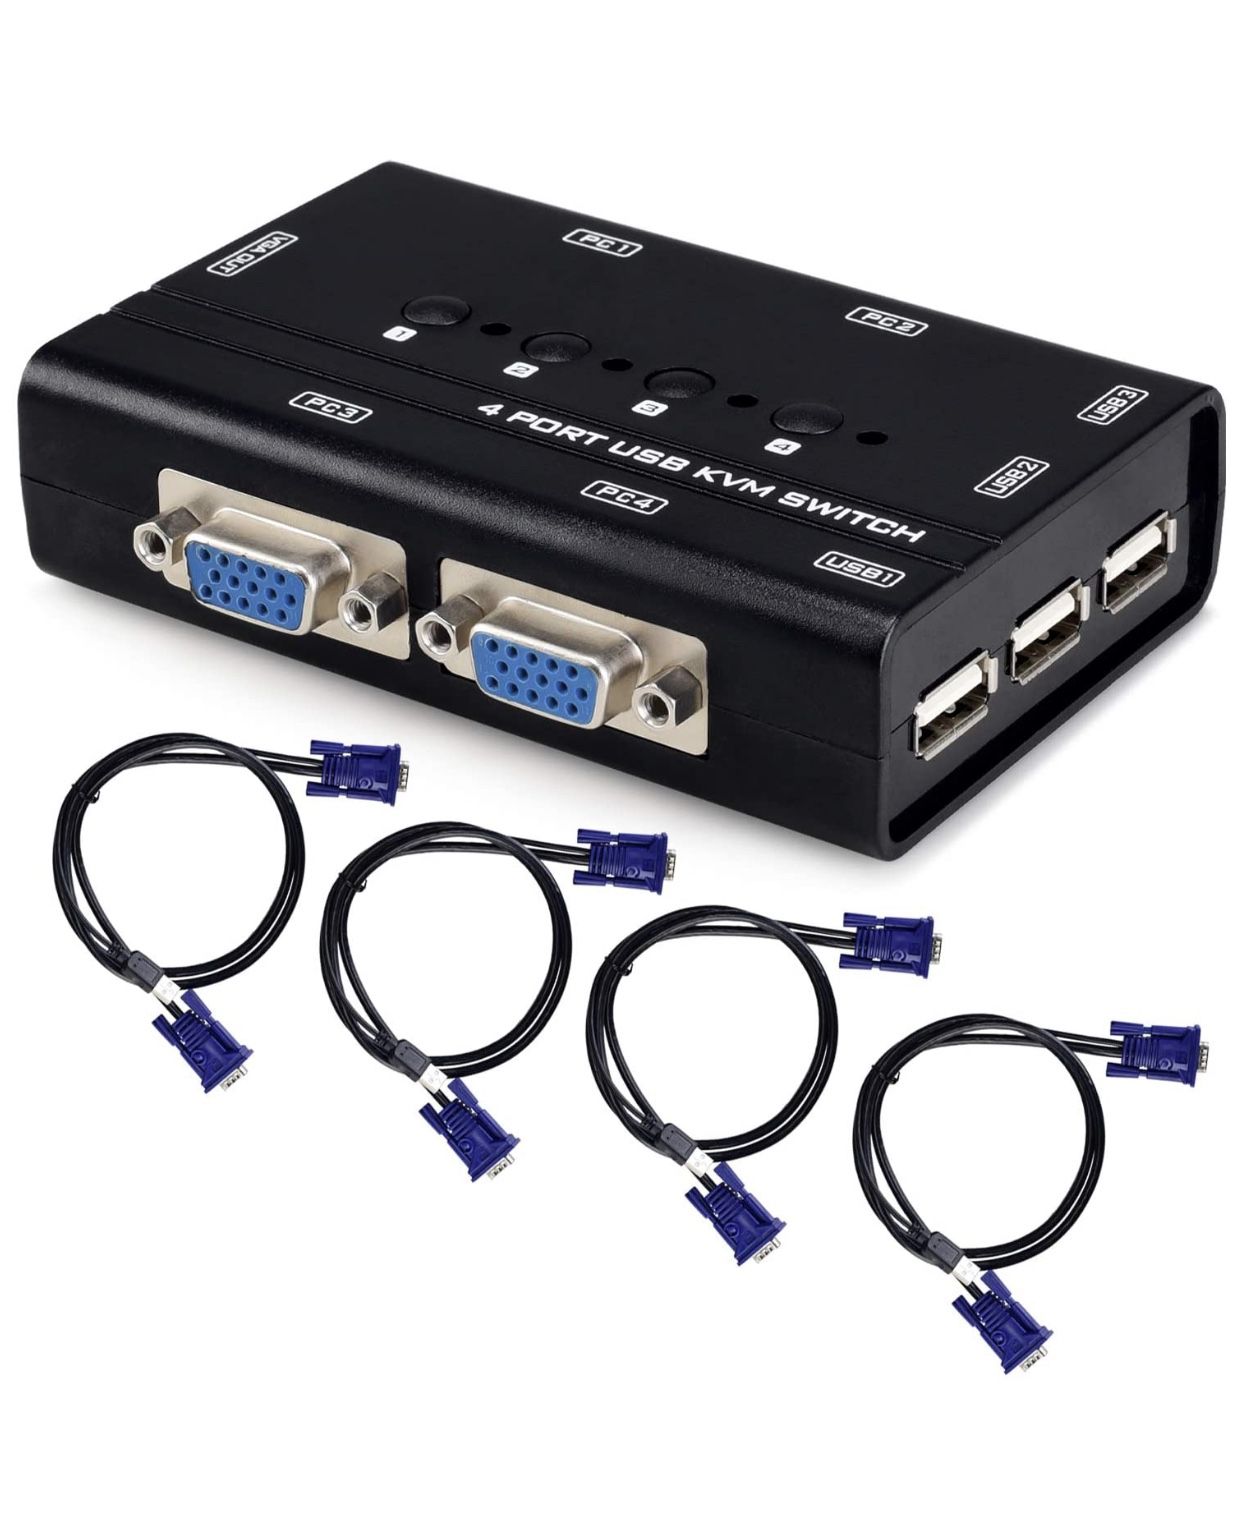 USB VGA KVM Switch with 4 Cables